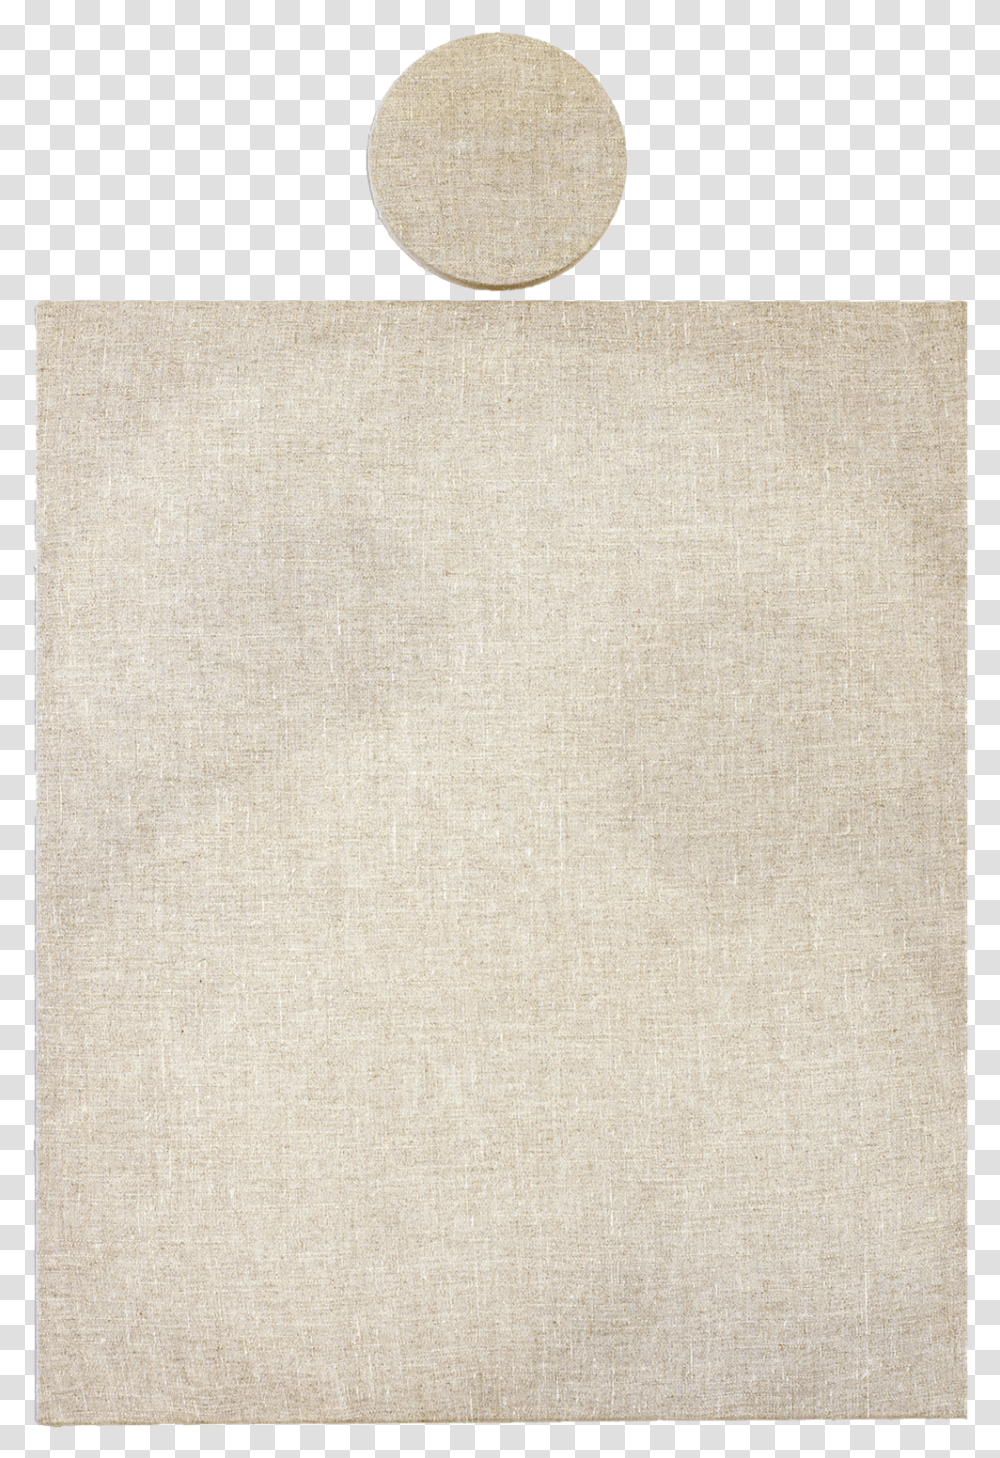 Untitled With A Circle Circle, Rug, Texture Transparent Png